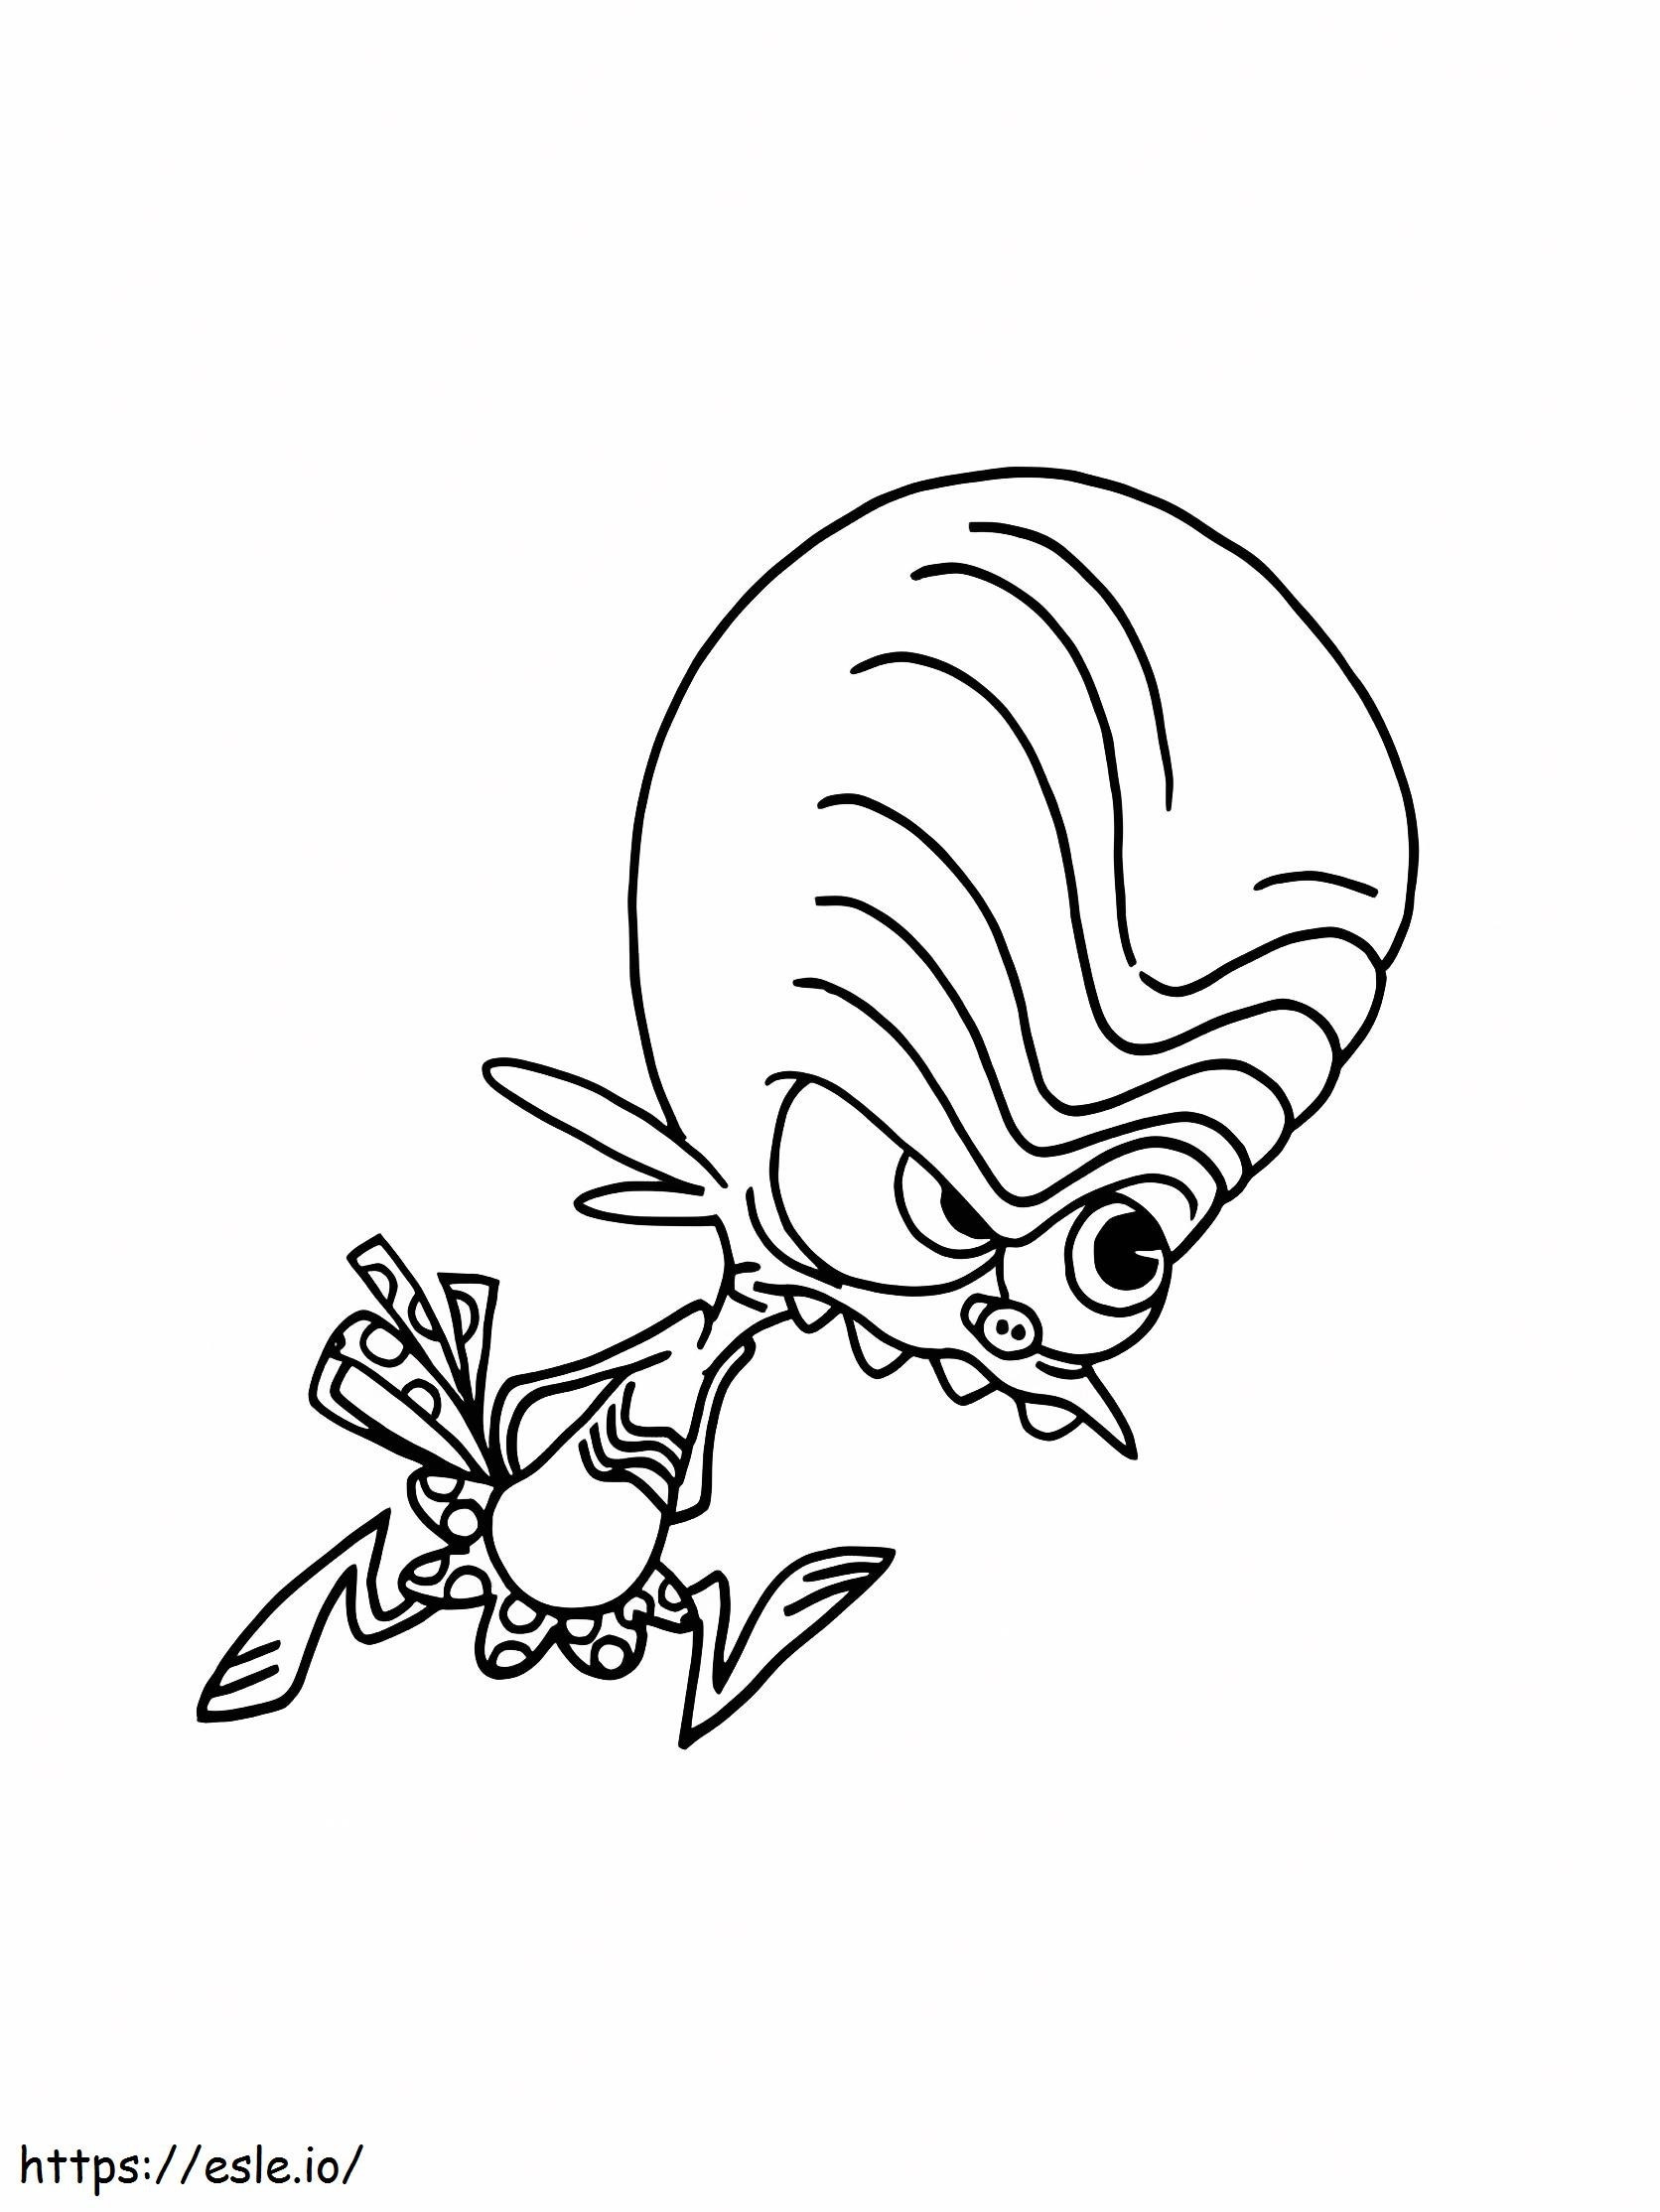 Angry Candy Caramella coloring page